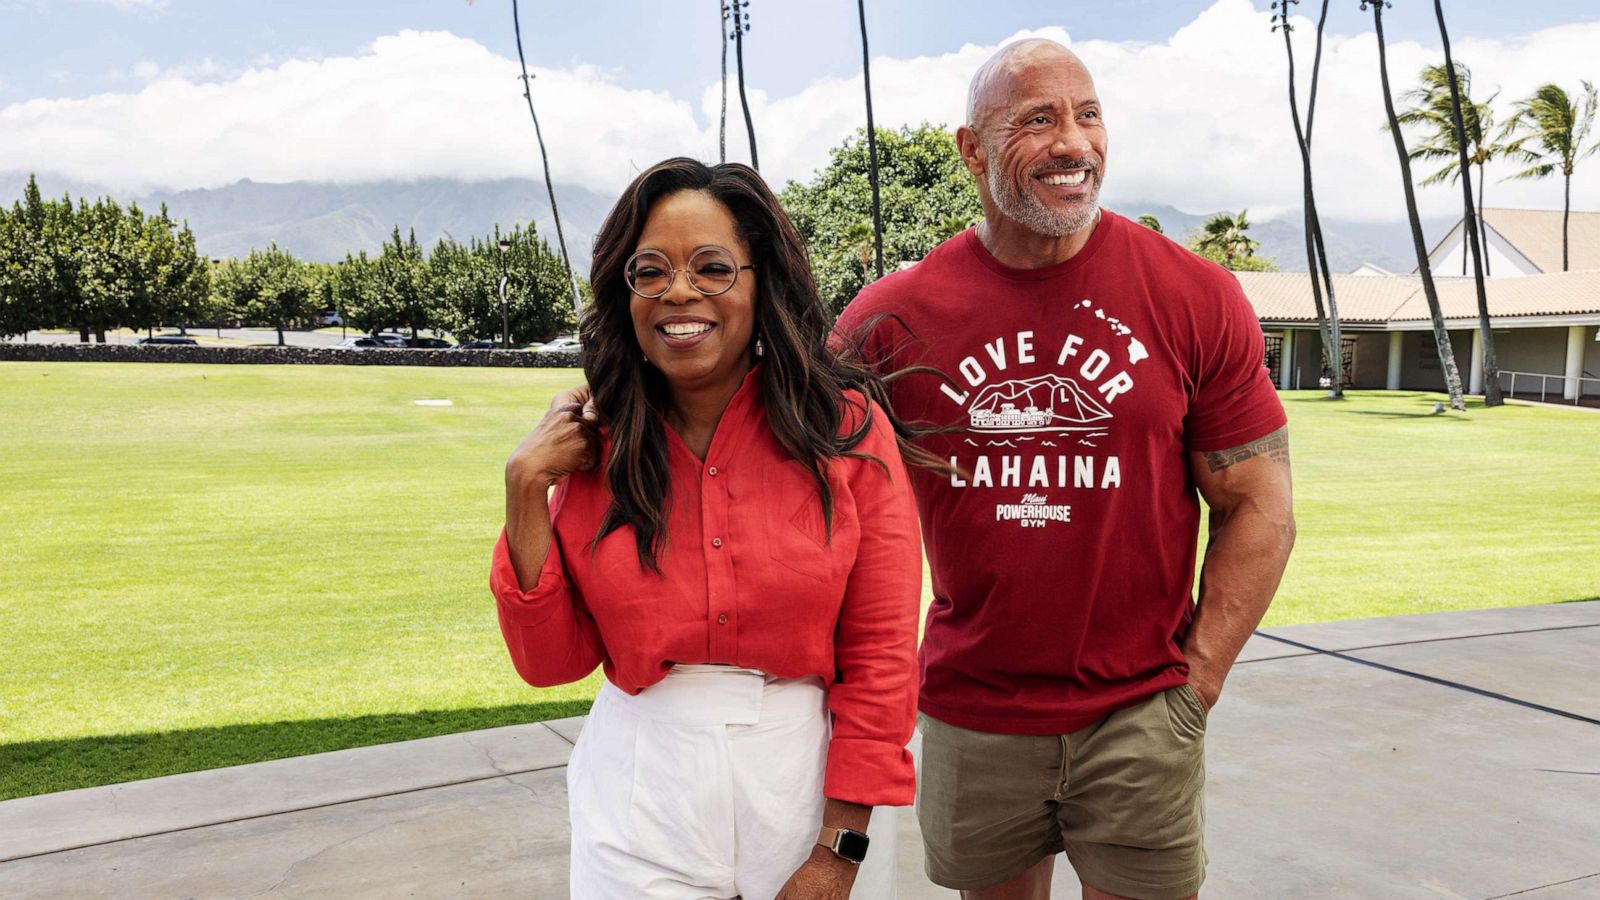 PHOTO: Oprah Winfrey and Dwayne Johnson Launch the "People’s Fund of Maui" to provide assistance to those devastated by the Maui wildfire.